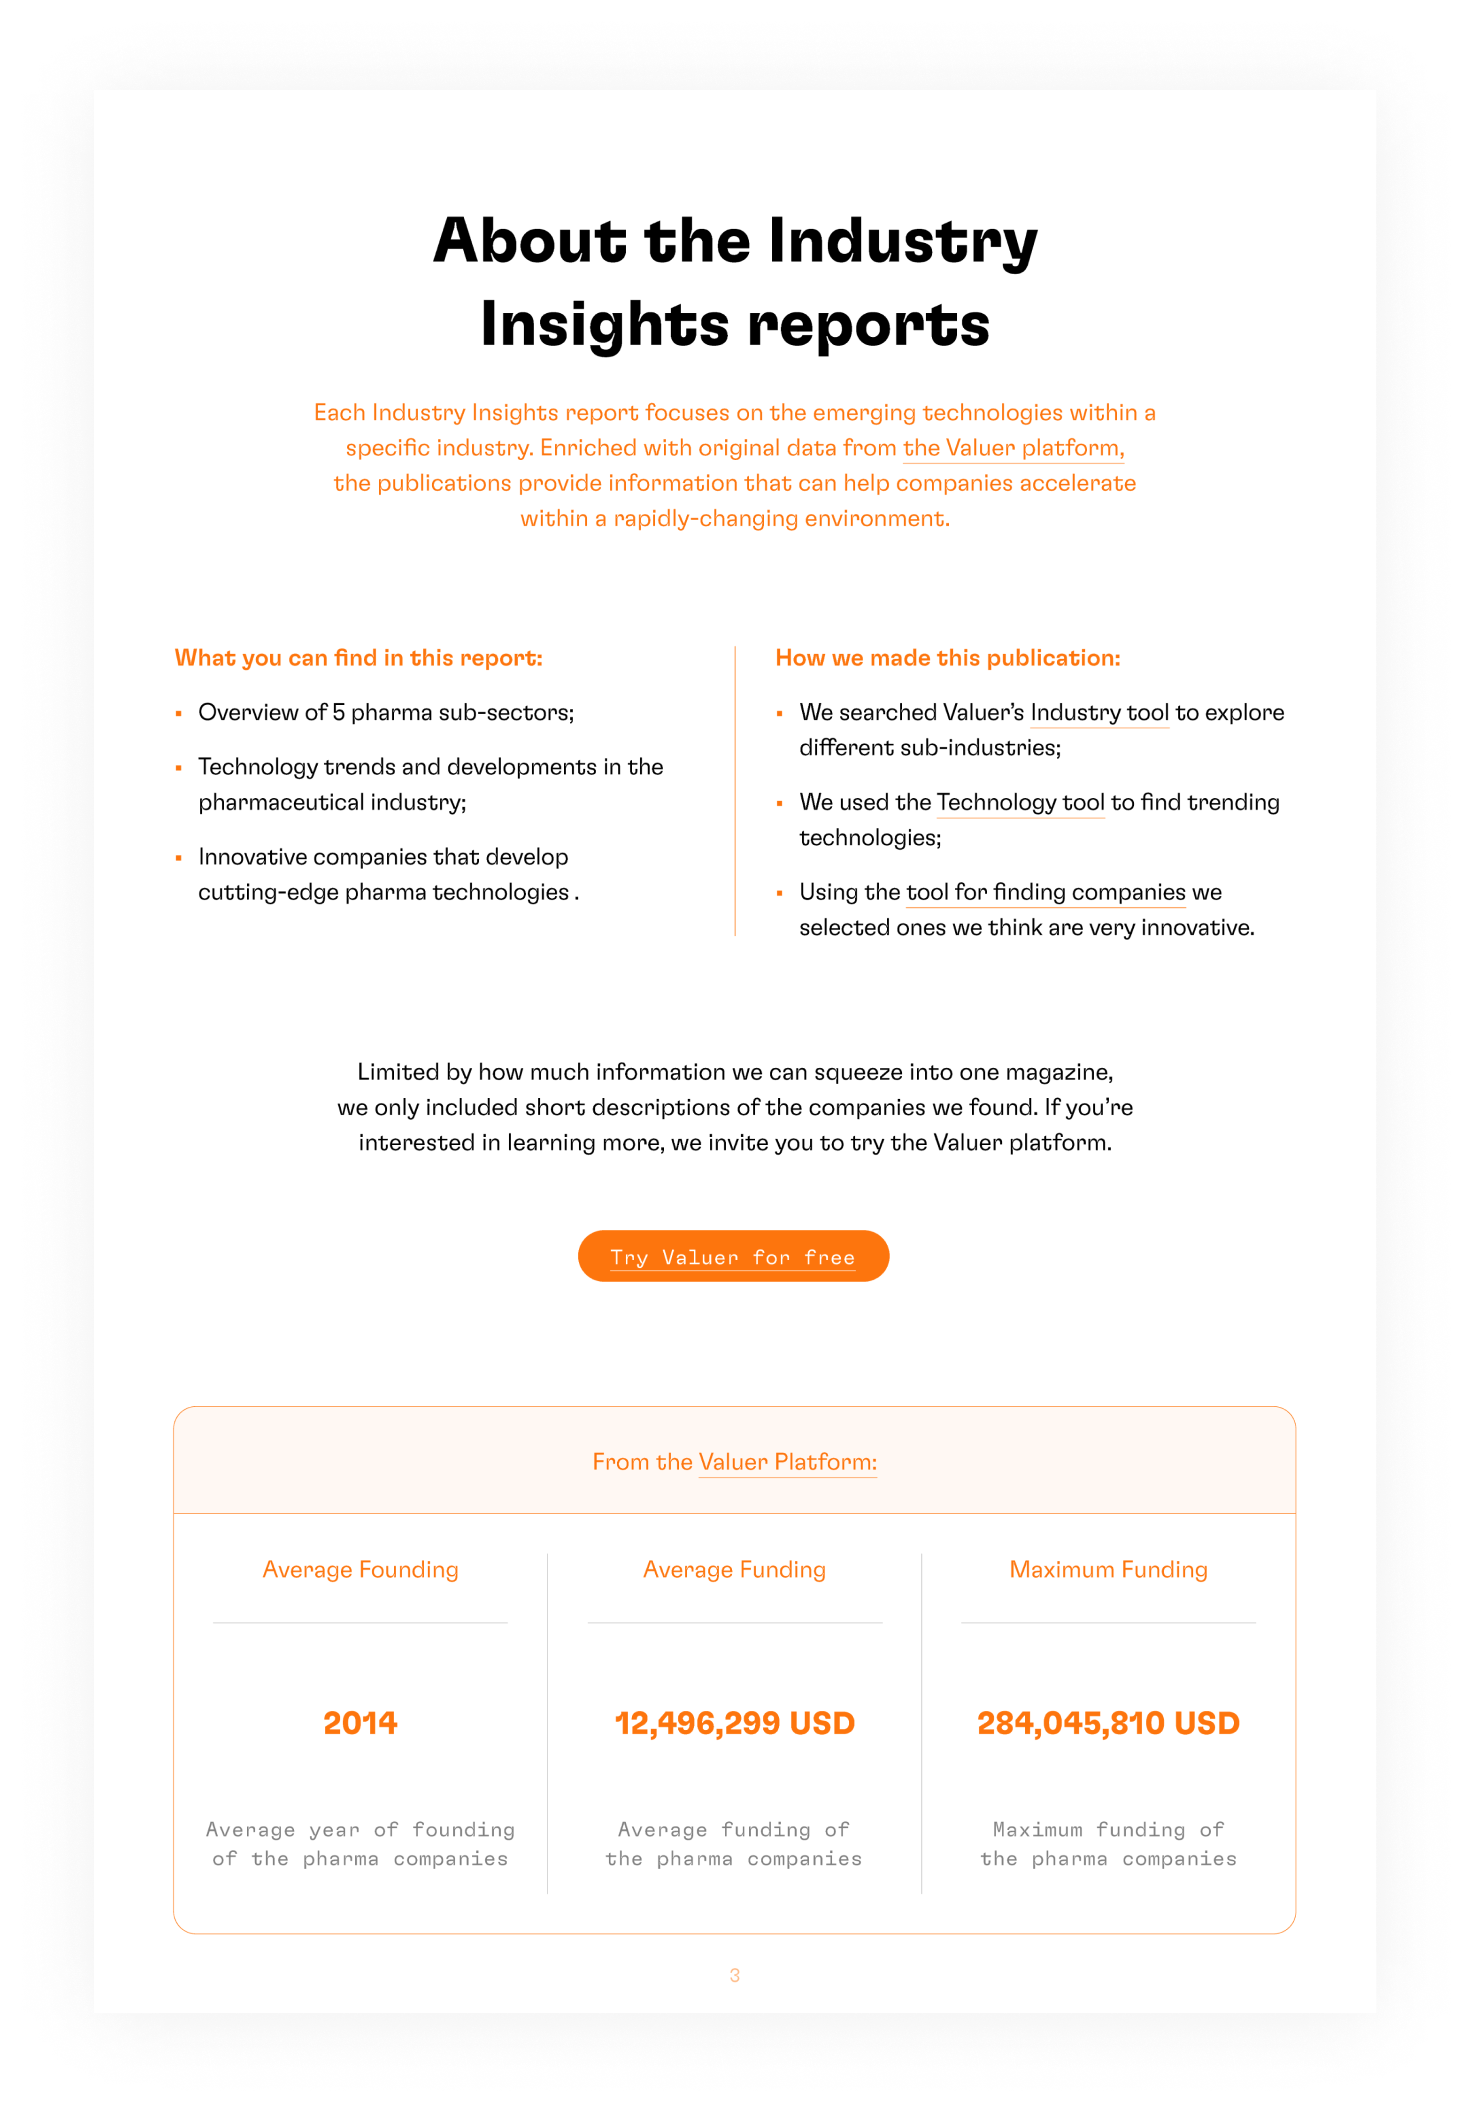 About the industry Insights reports